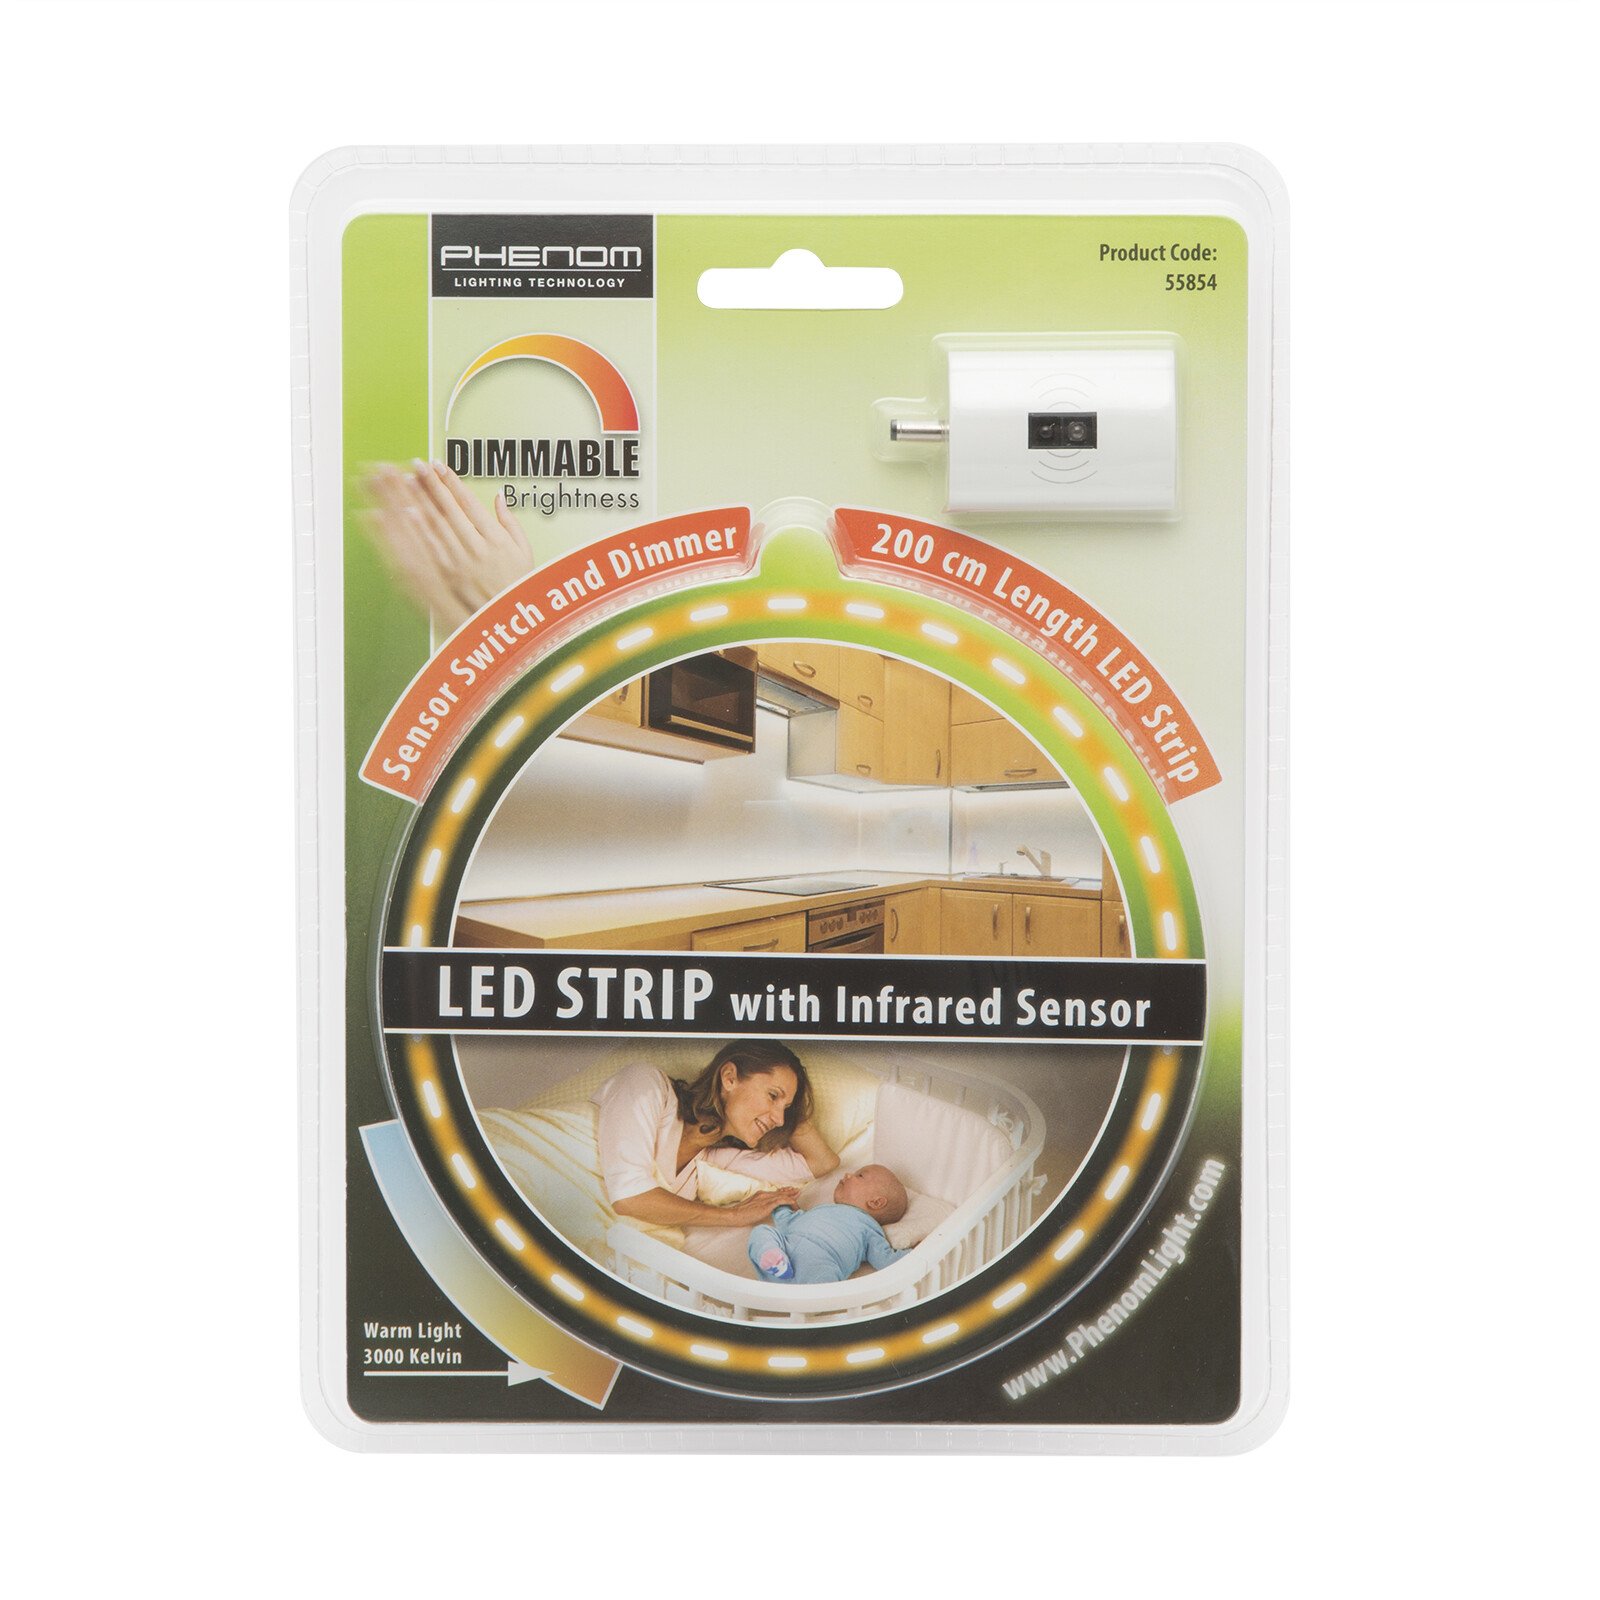 LED Strip with Infrared Sensor thumb